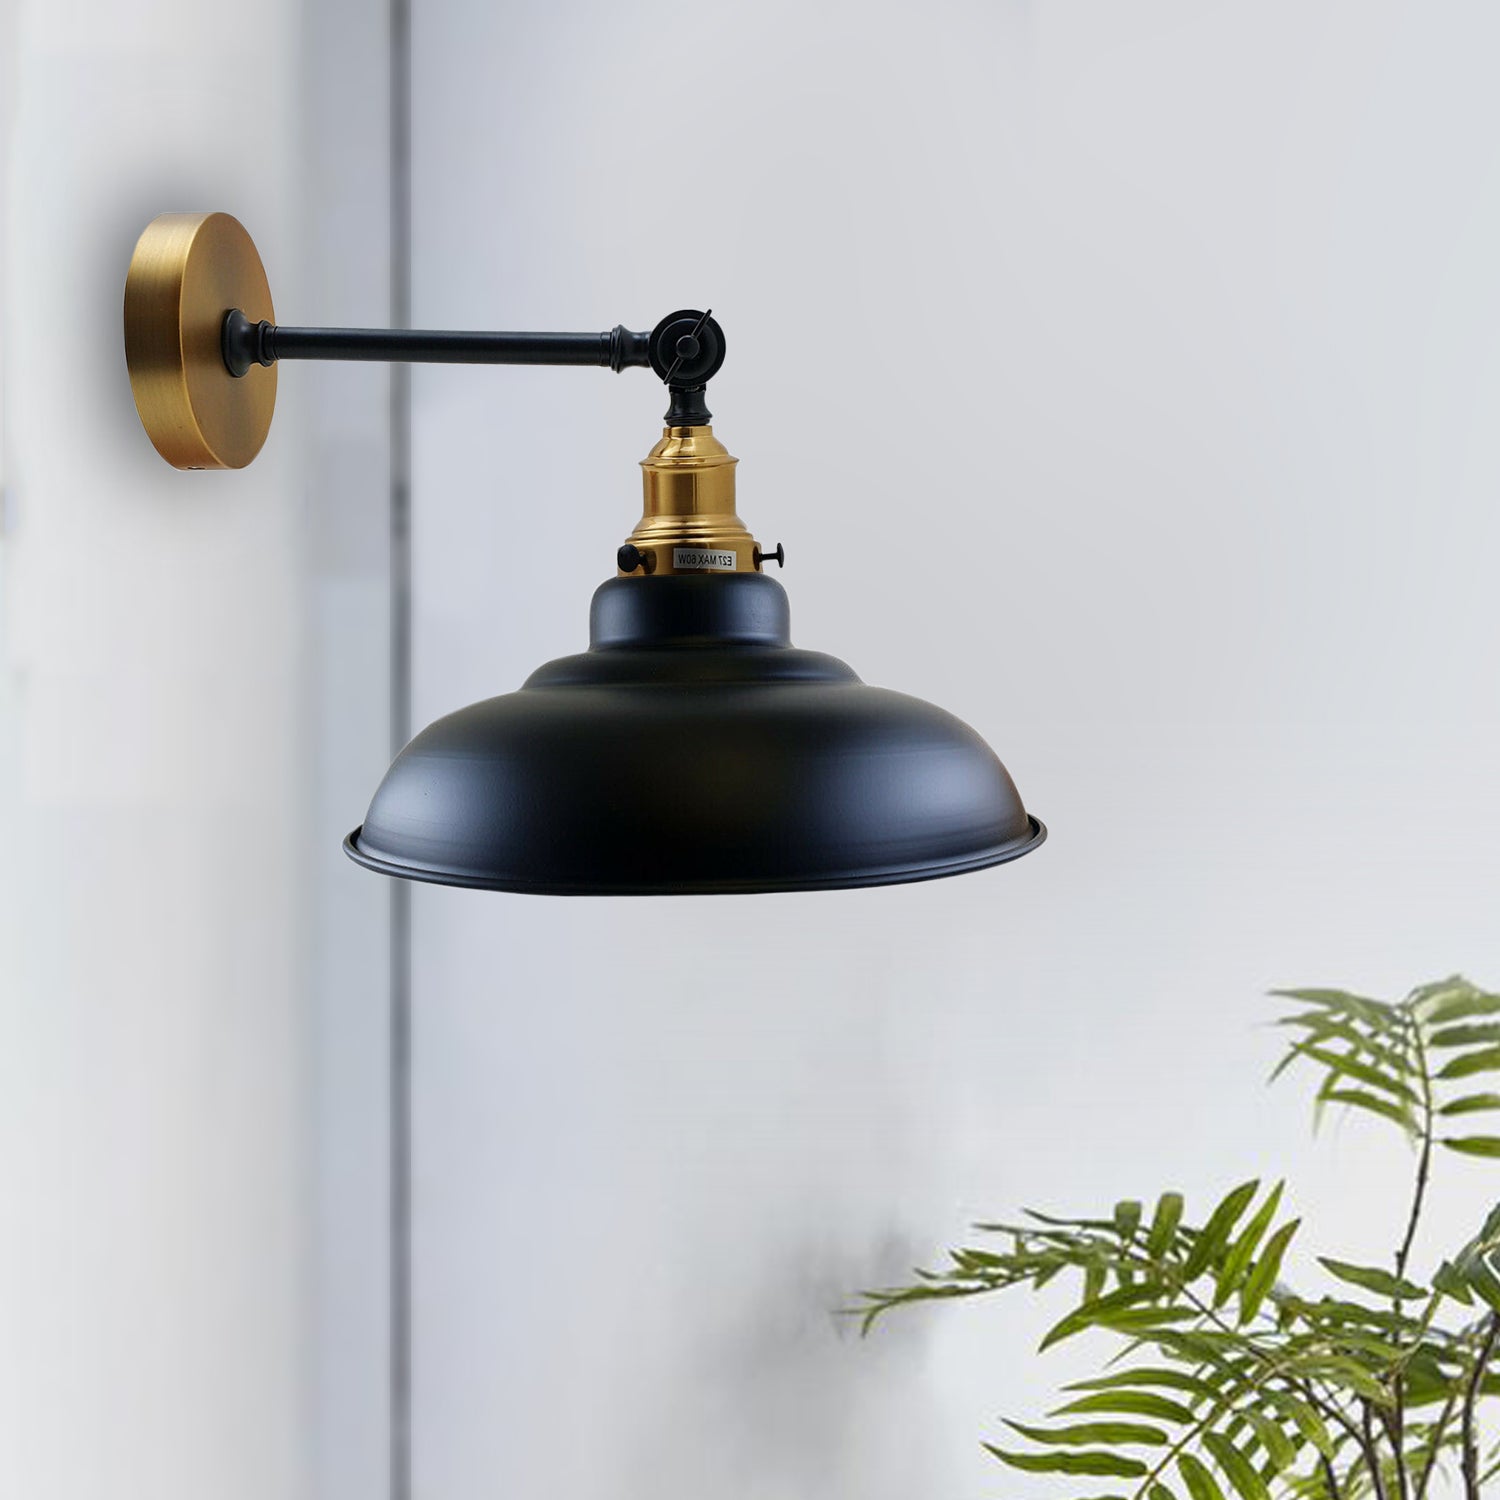 Black Shade With Adjustable Curvy Swing Arm Wall Light Fixture Loft Style Industrial Wall Sconce~3462 - LEDSone UK Ltd